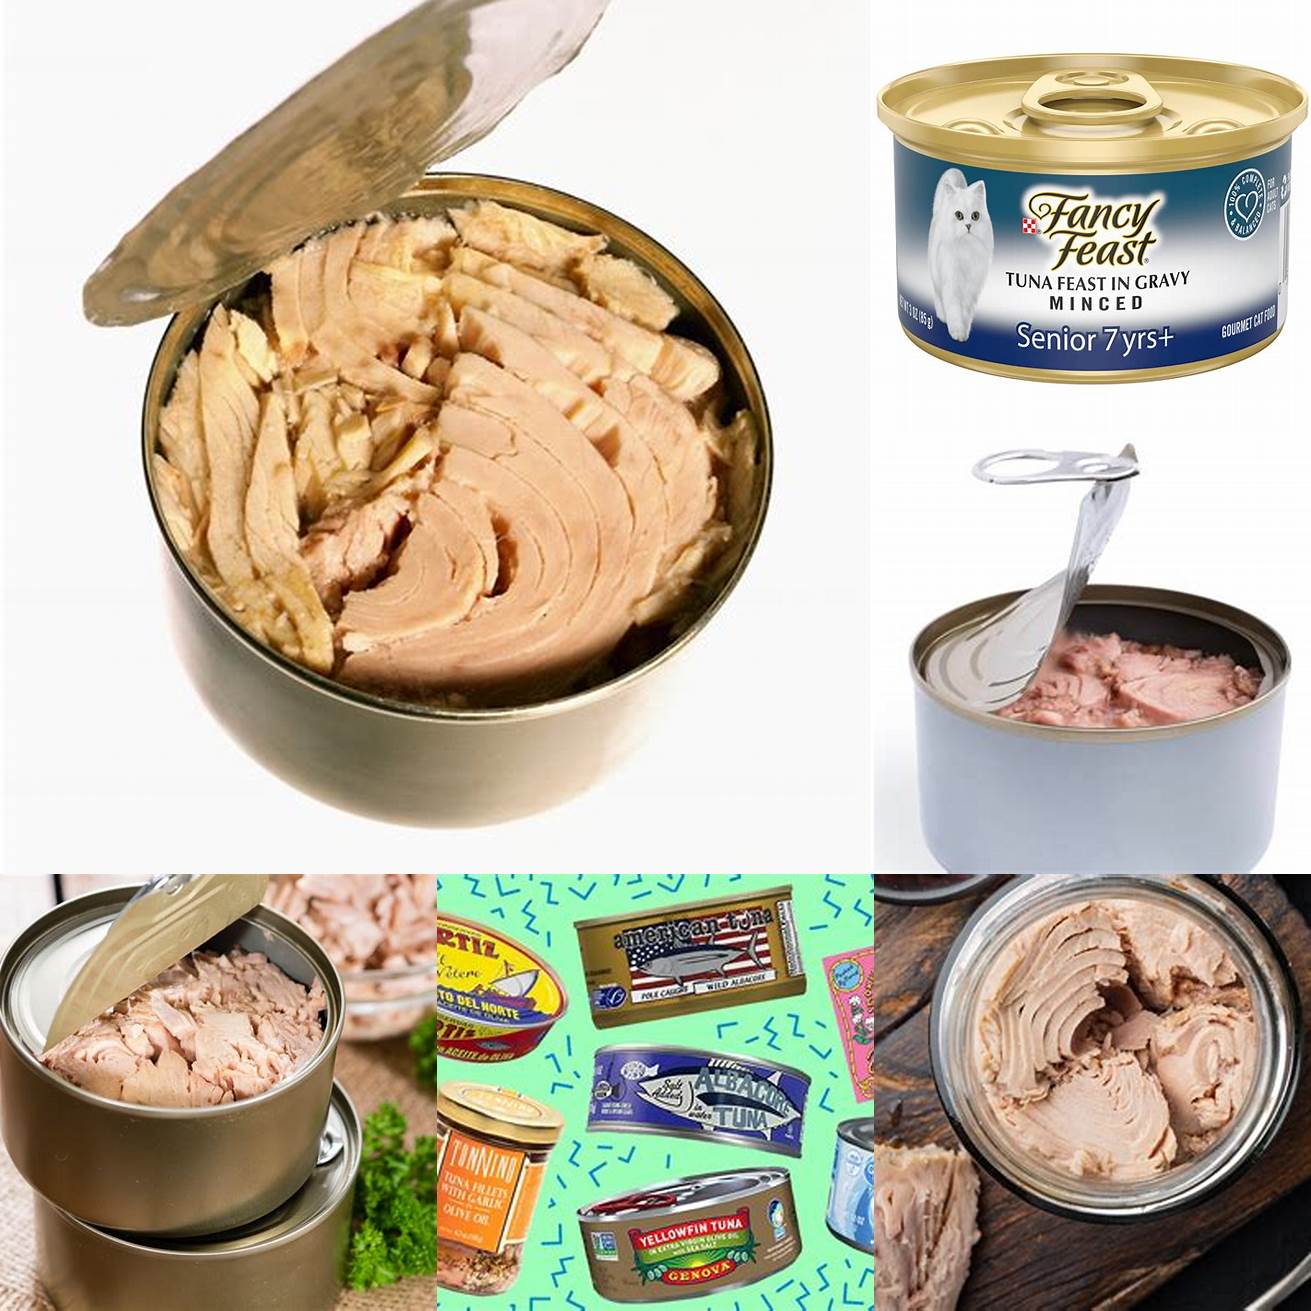 Canned tuna is often high in sodium